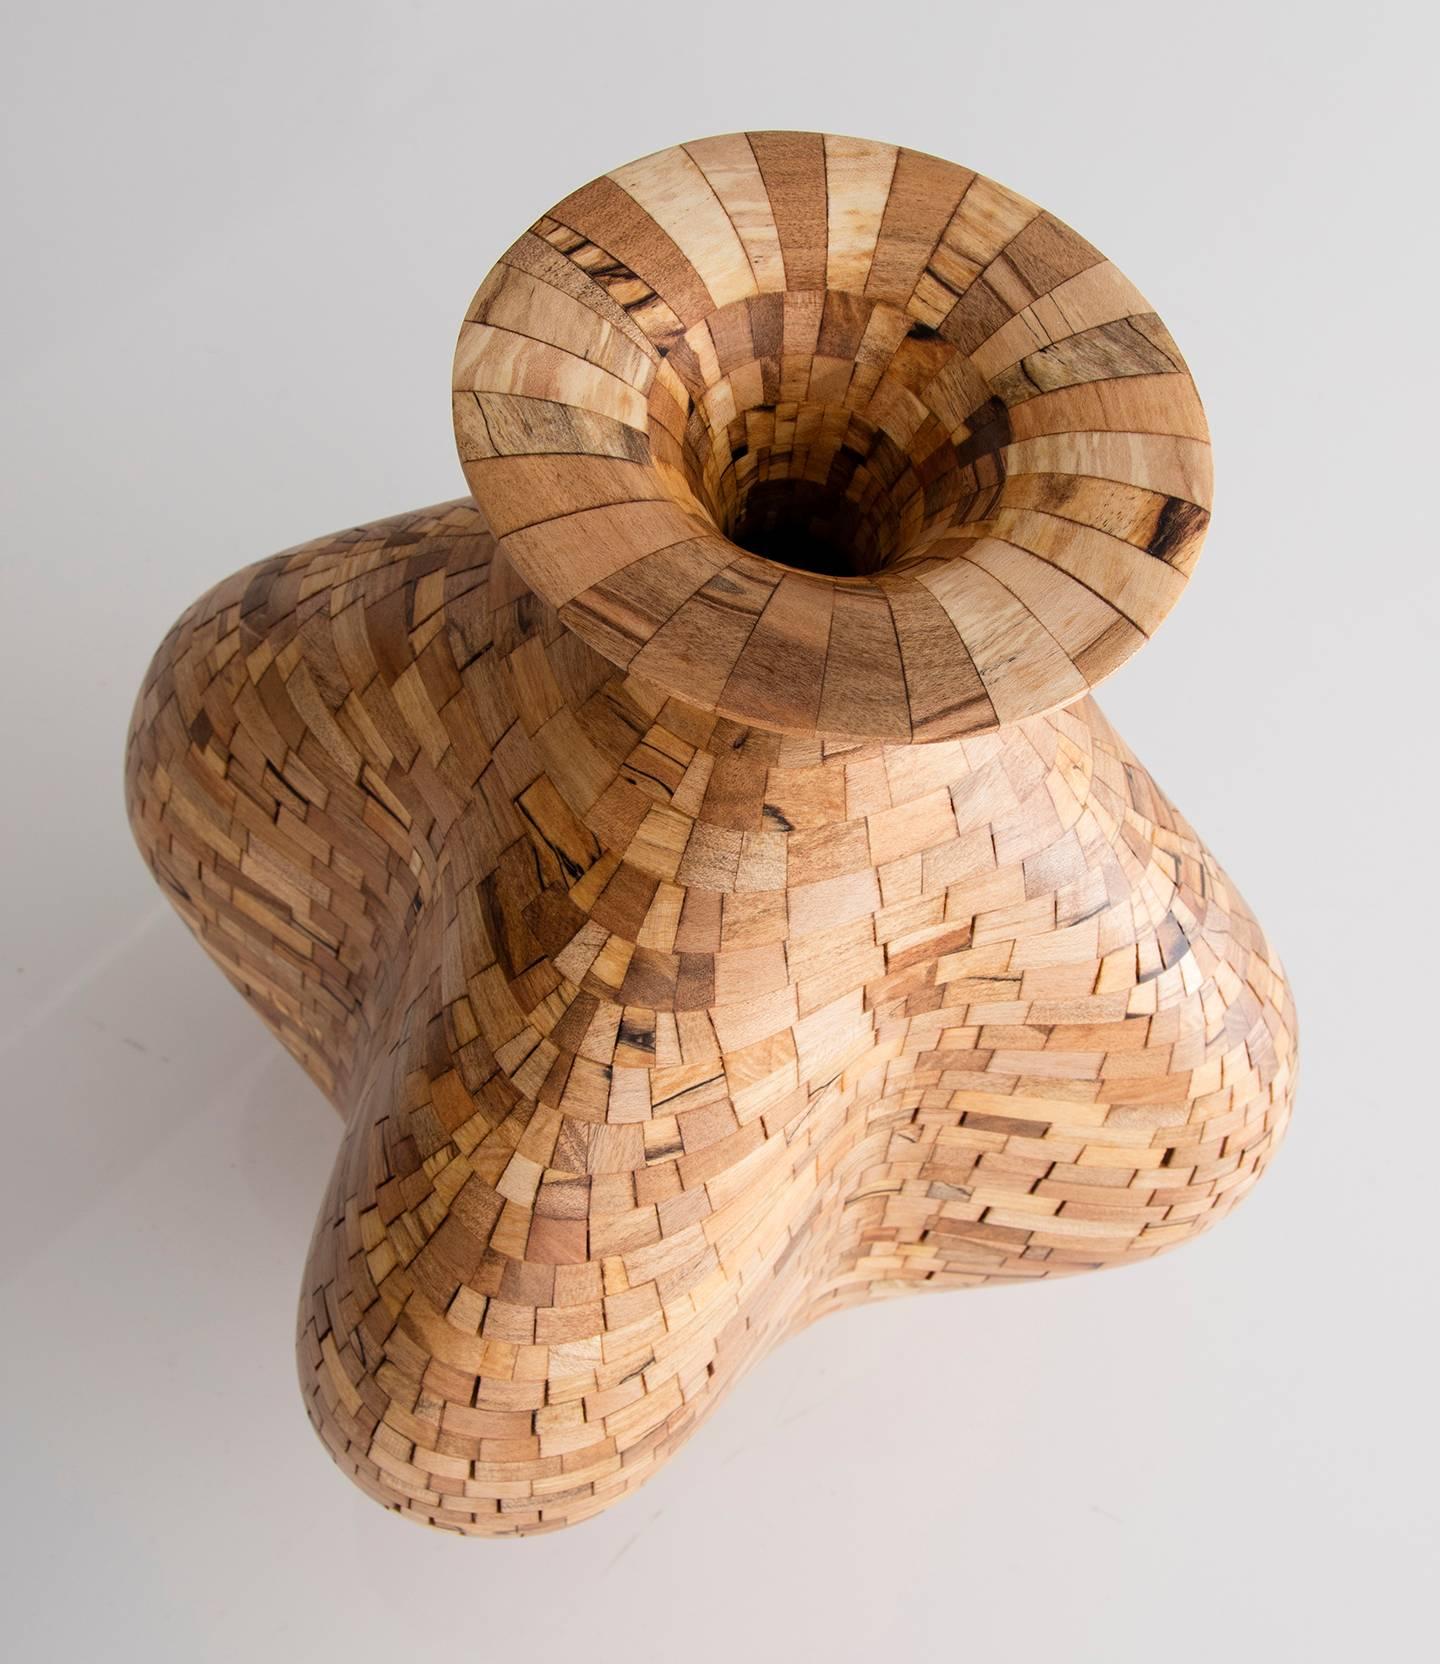 Modern Contemporary American Wooden Vase, Spalted Maple, Handmade, Sculpture, In Stock